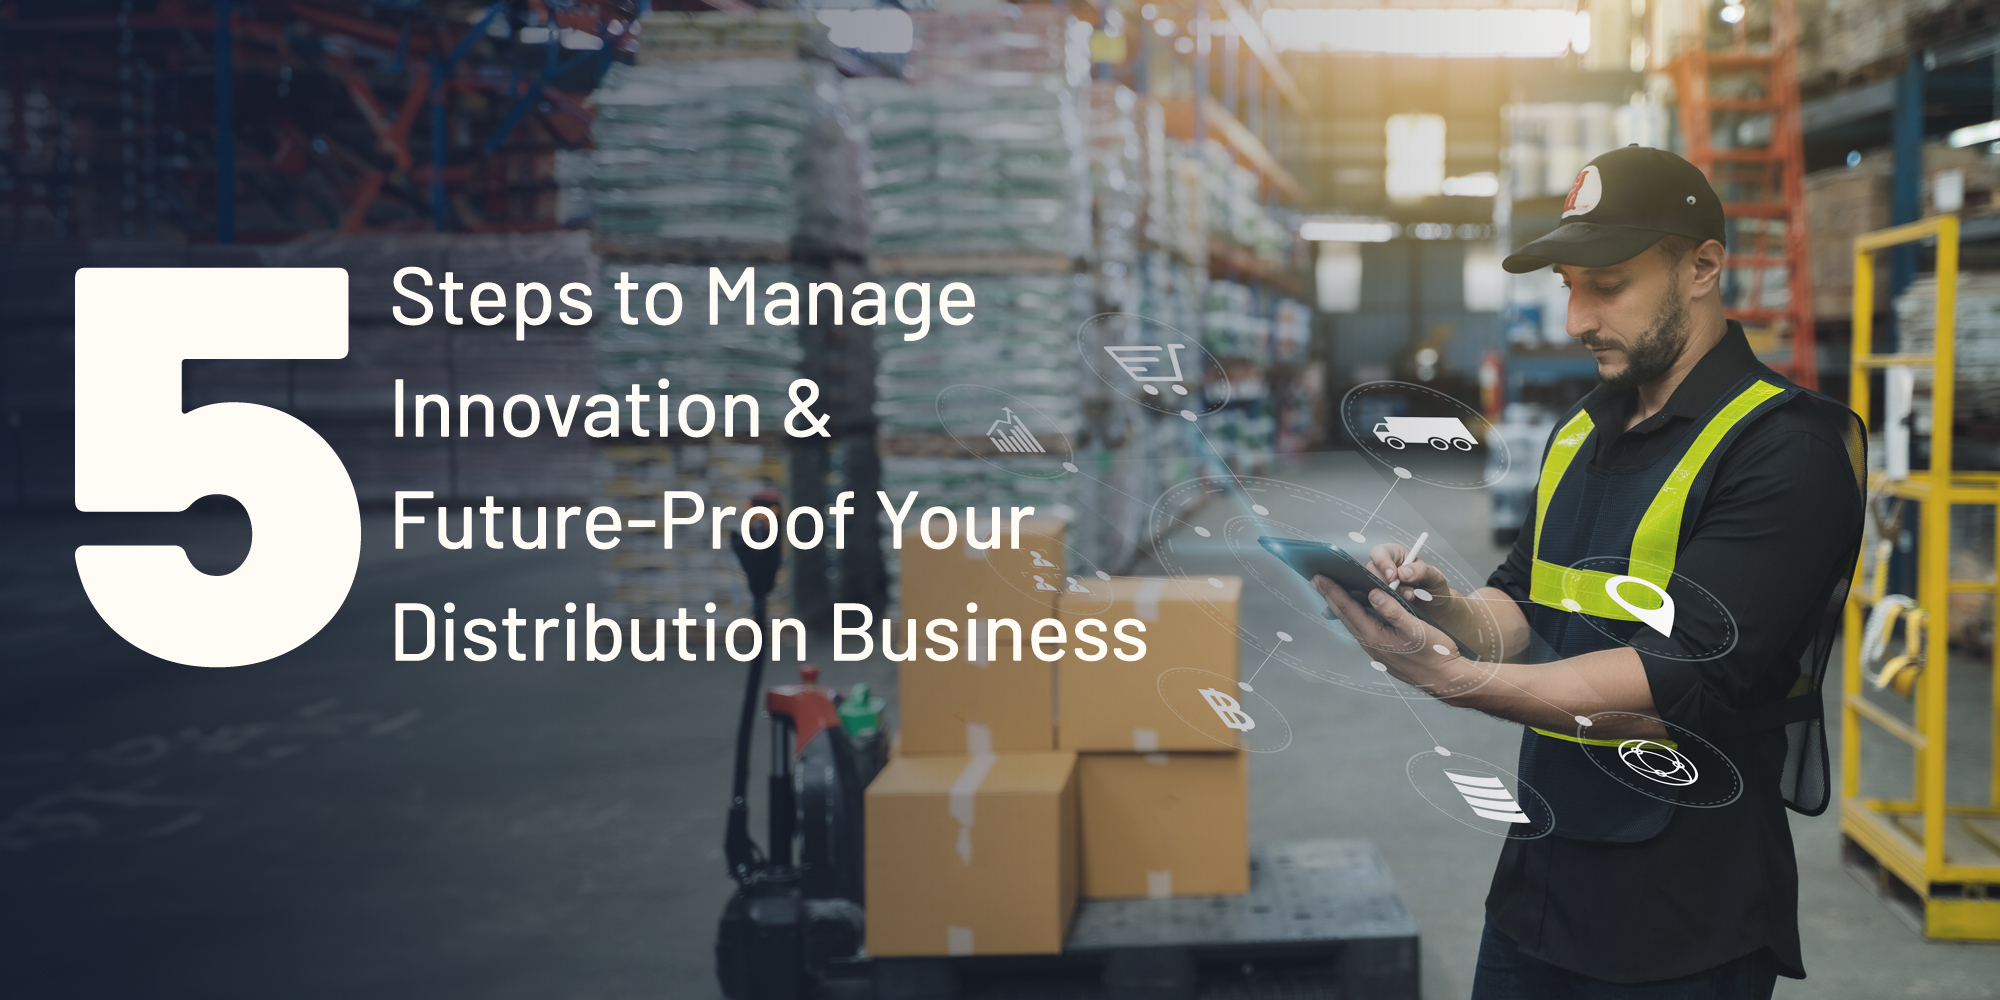 5 Steps to Manage Innovation & Future-Proof Your Distribution Business thumbnail